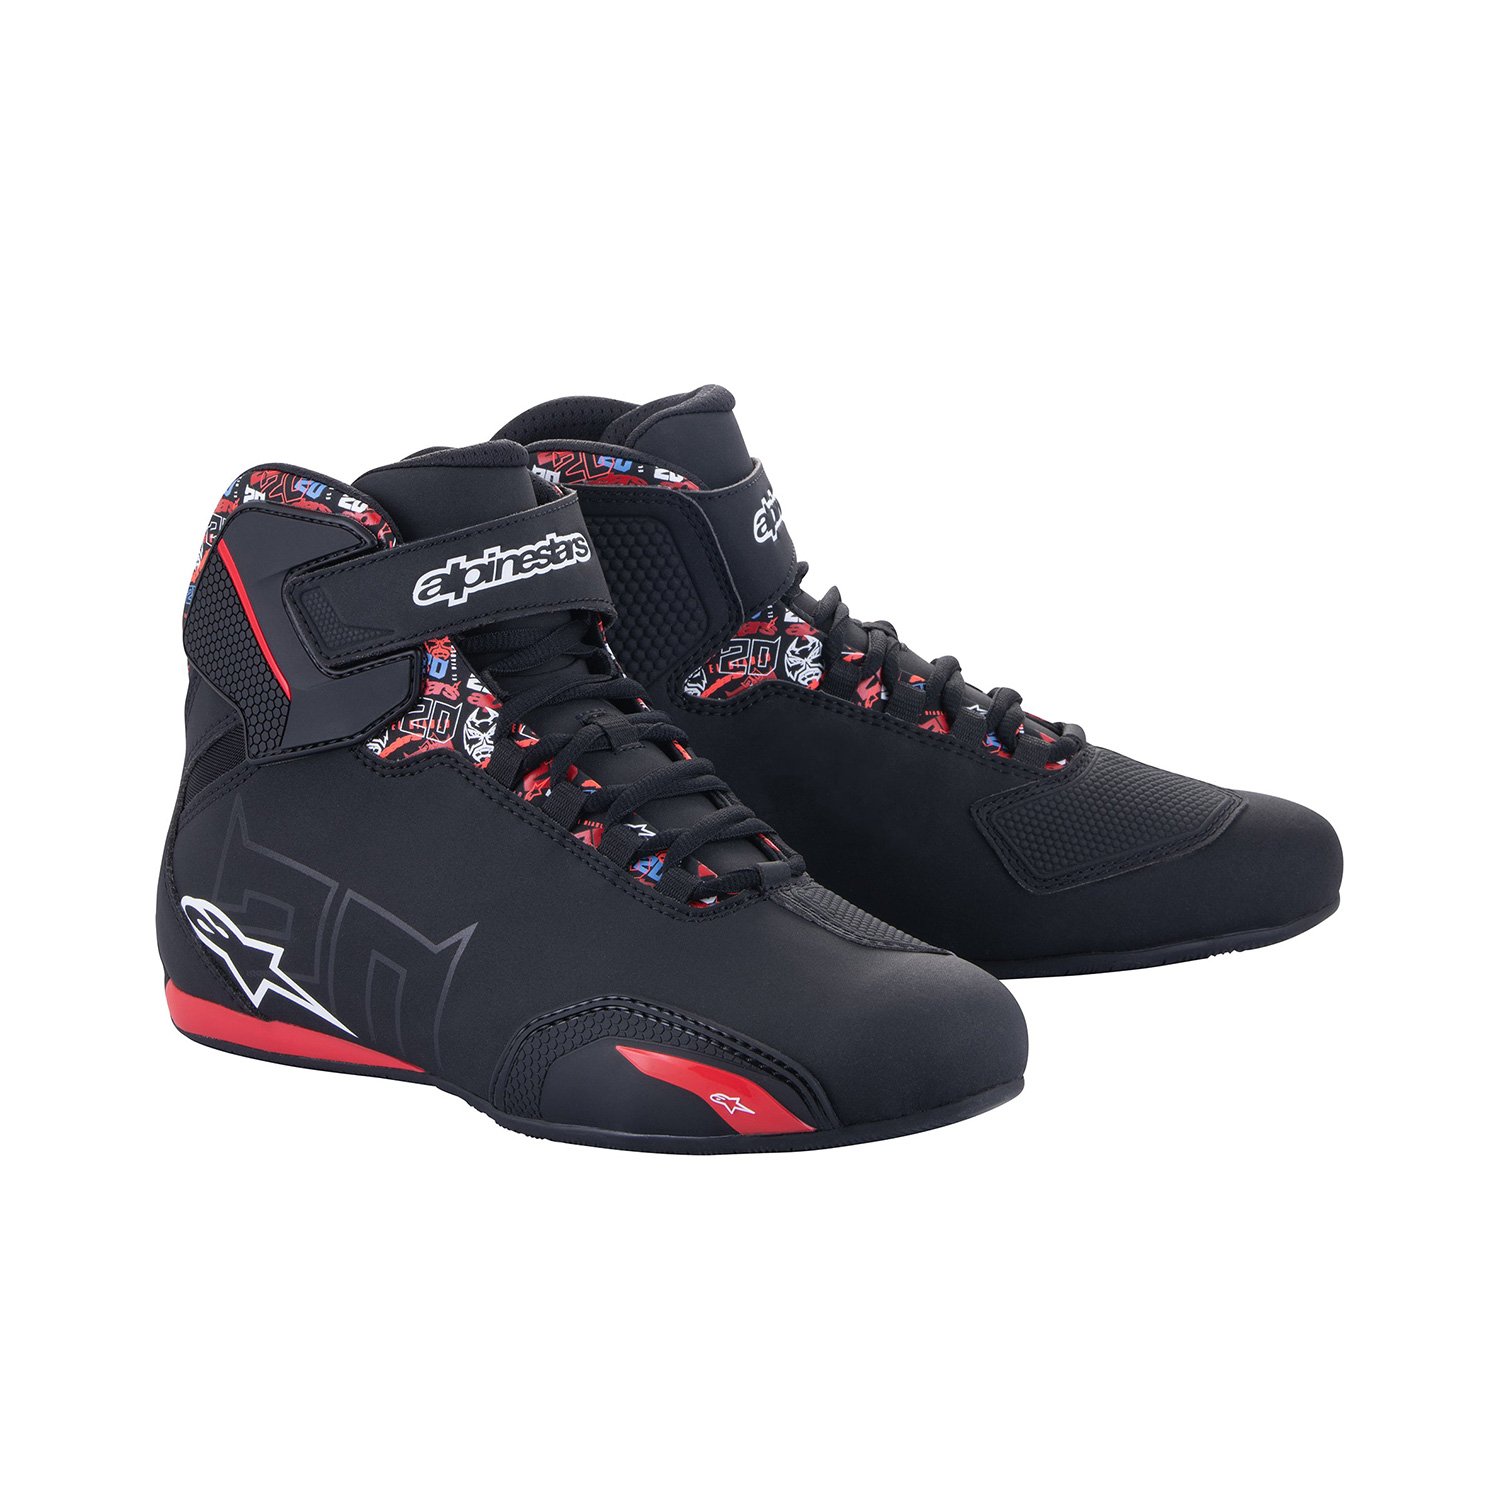 Image of EU Alpinestars FQ20 Sektor Noir Bright Rouge Chaussures Taille US 65